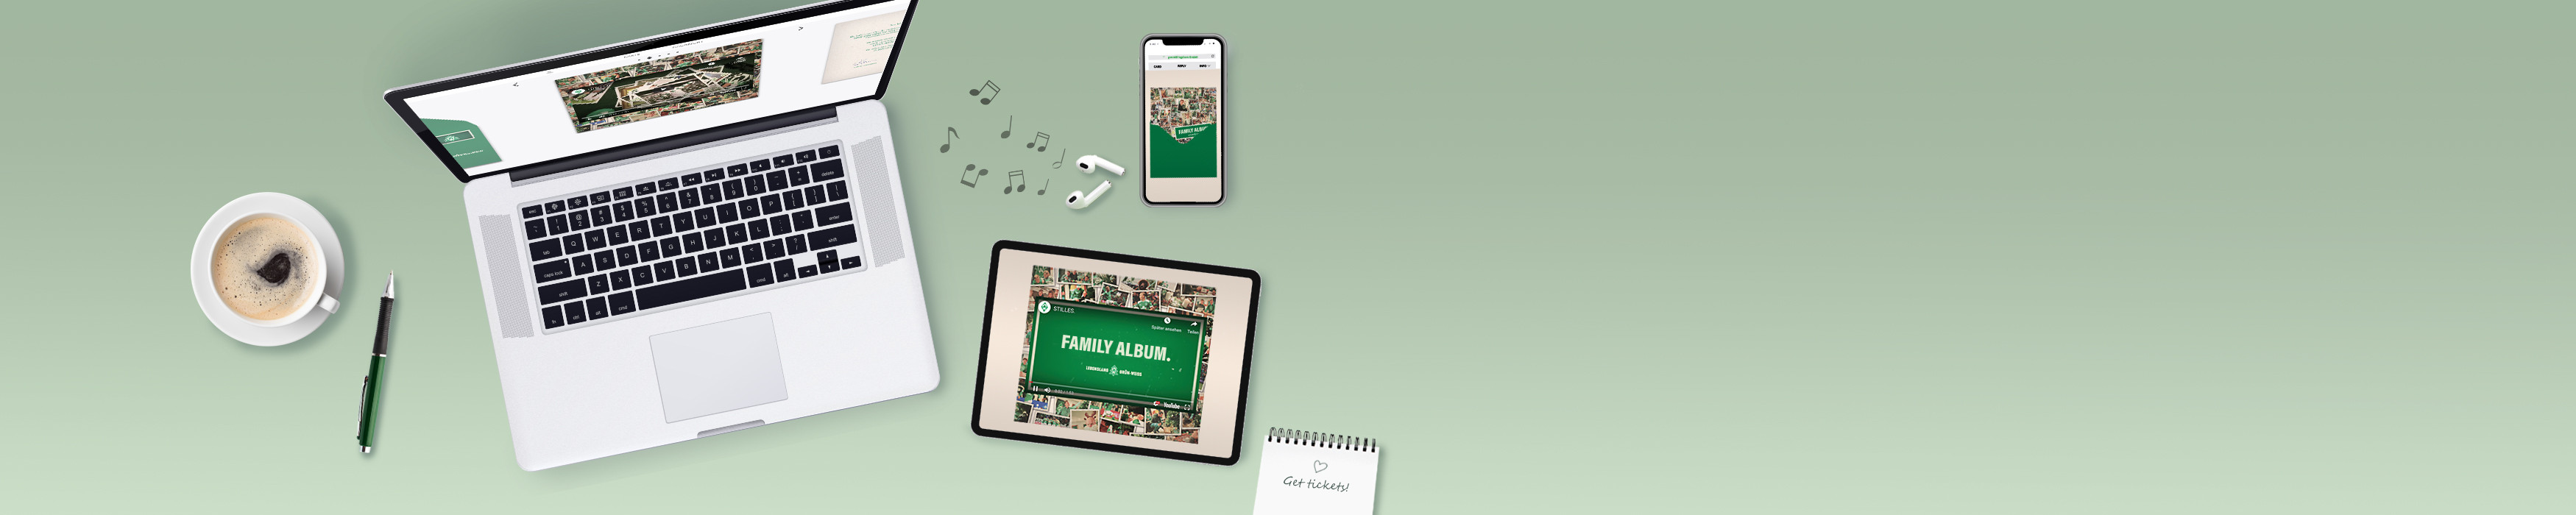 Paperless corporate holiday cards displayed on laptop, ipad and iphone on green background